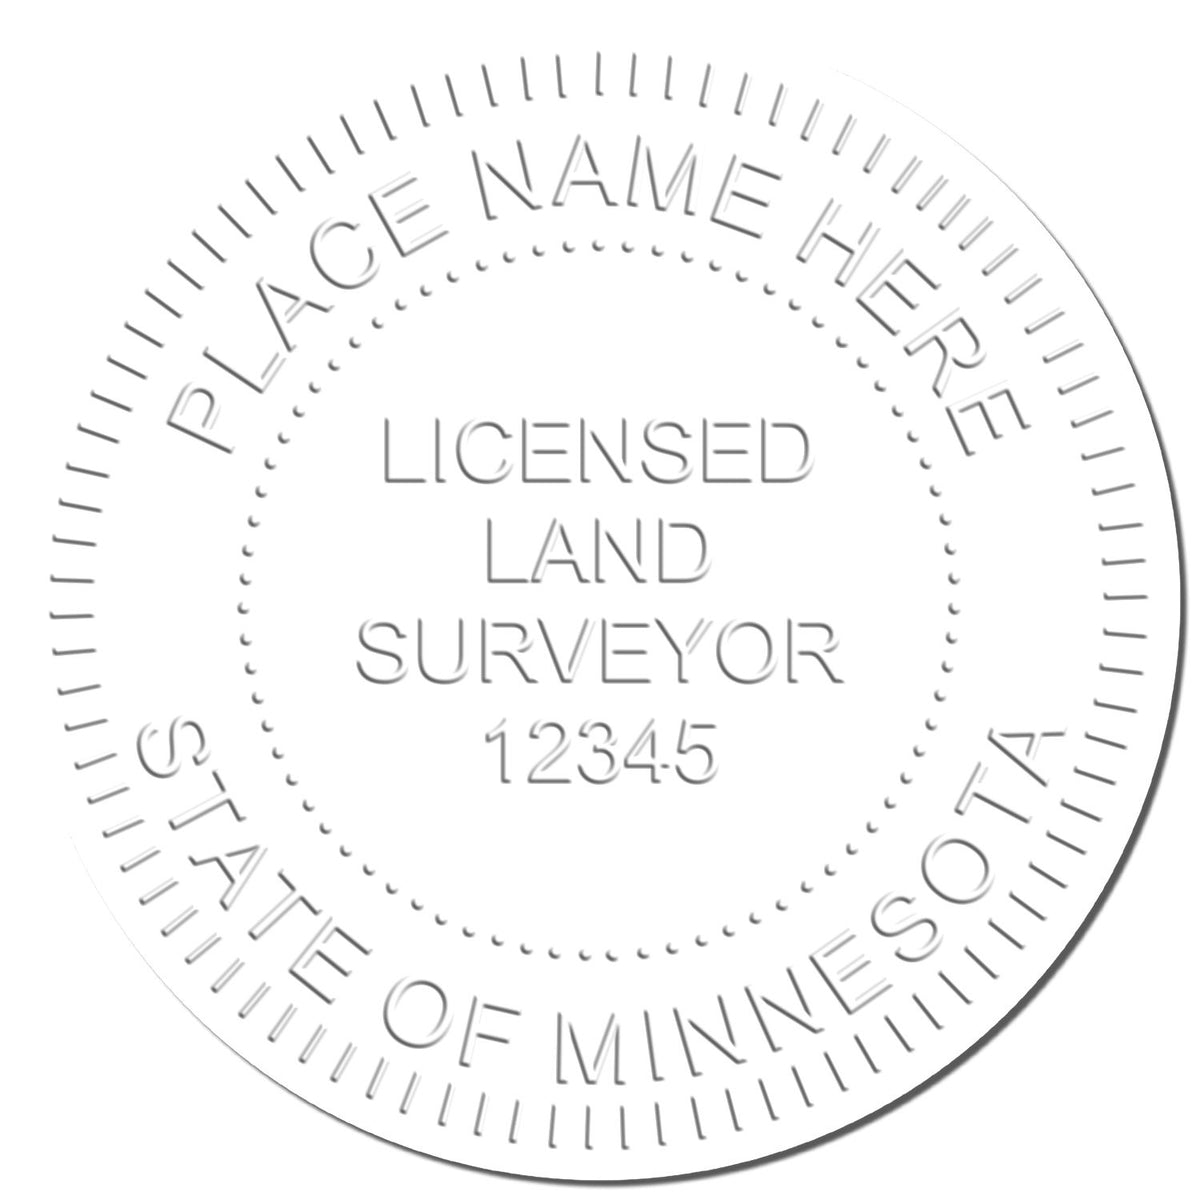 This paper is stamped with a sample imprint of the Gift Minnesota Land Surveyor Seal, signifying its quality and reliability.